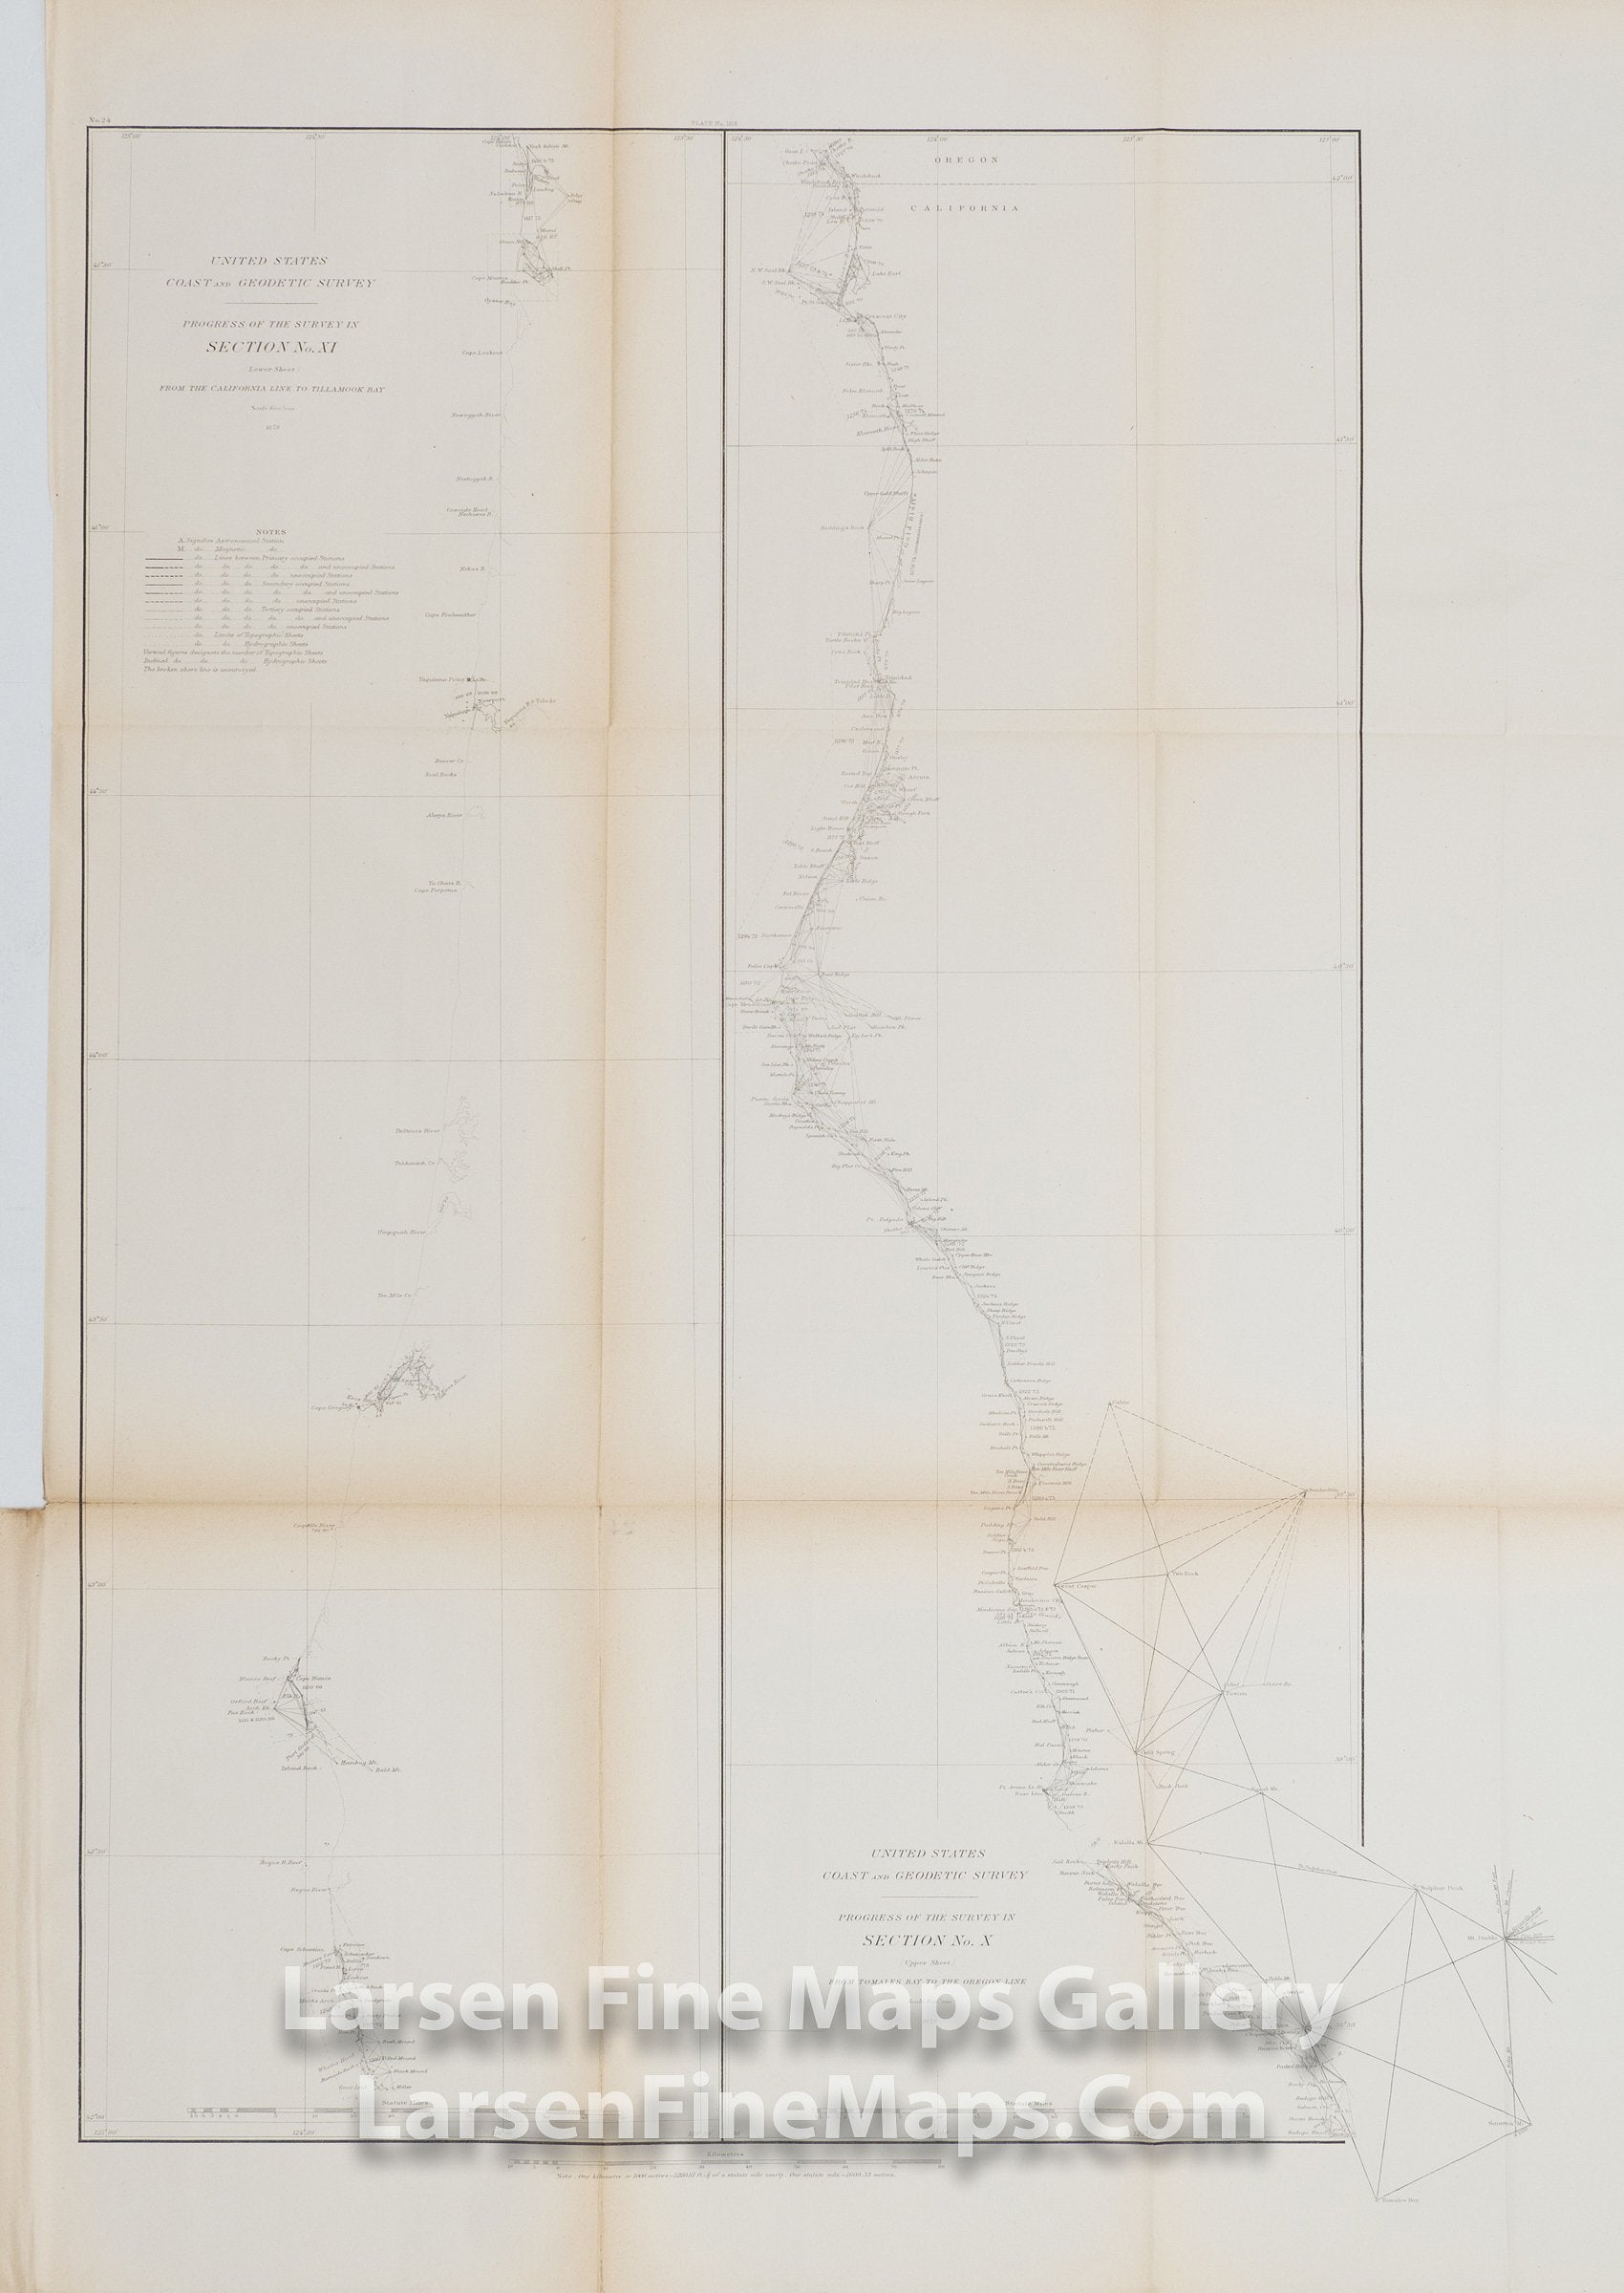 Sketch Showing the Progress of the Survey in Section X (Upper Sheet). Coast of California from Tomales Bay to the Oregon line, and Section XI (Lower Sheet), Coast of Oregon, from the California line to Tilllamook Bay